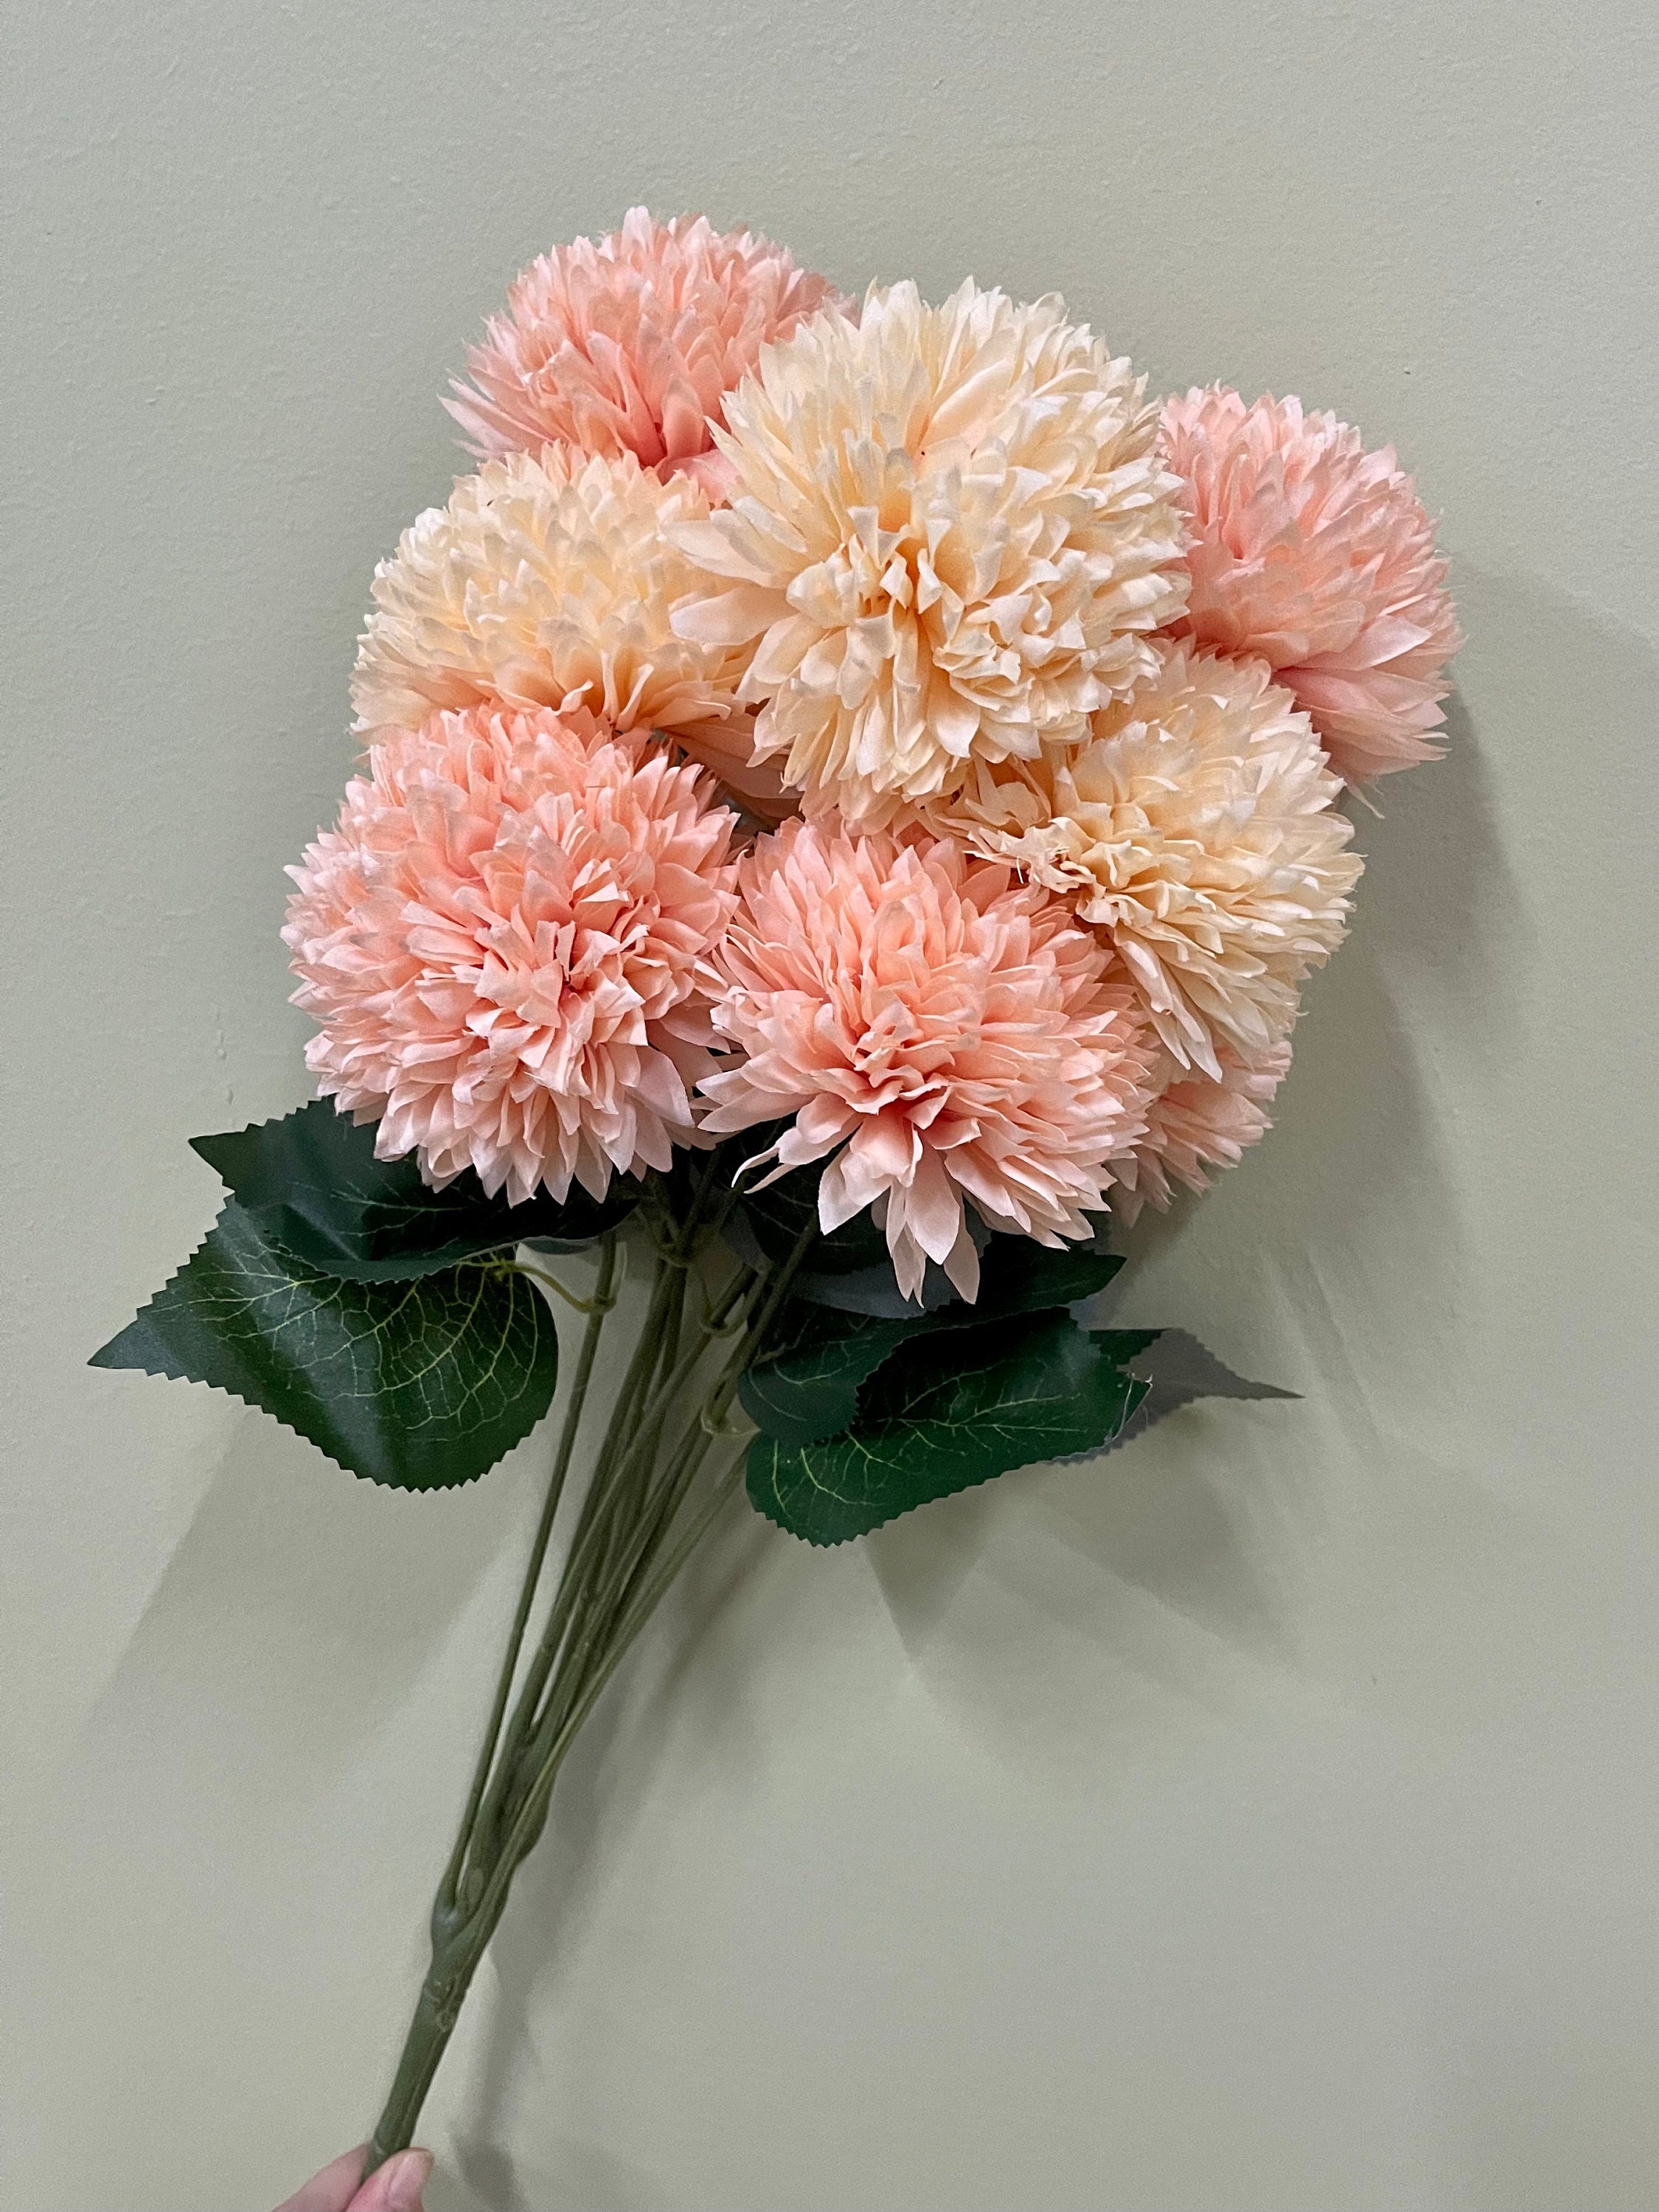 Wholesale High Quality Silk Rose Heads For Chrysanthemum Paper Flowers  Artificial Plastic Paper Flowers With WF002 From Dhhonton, $17.69